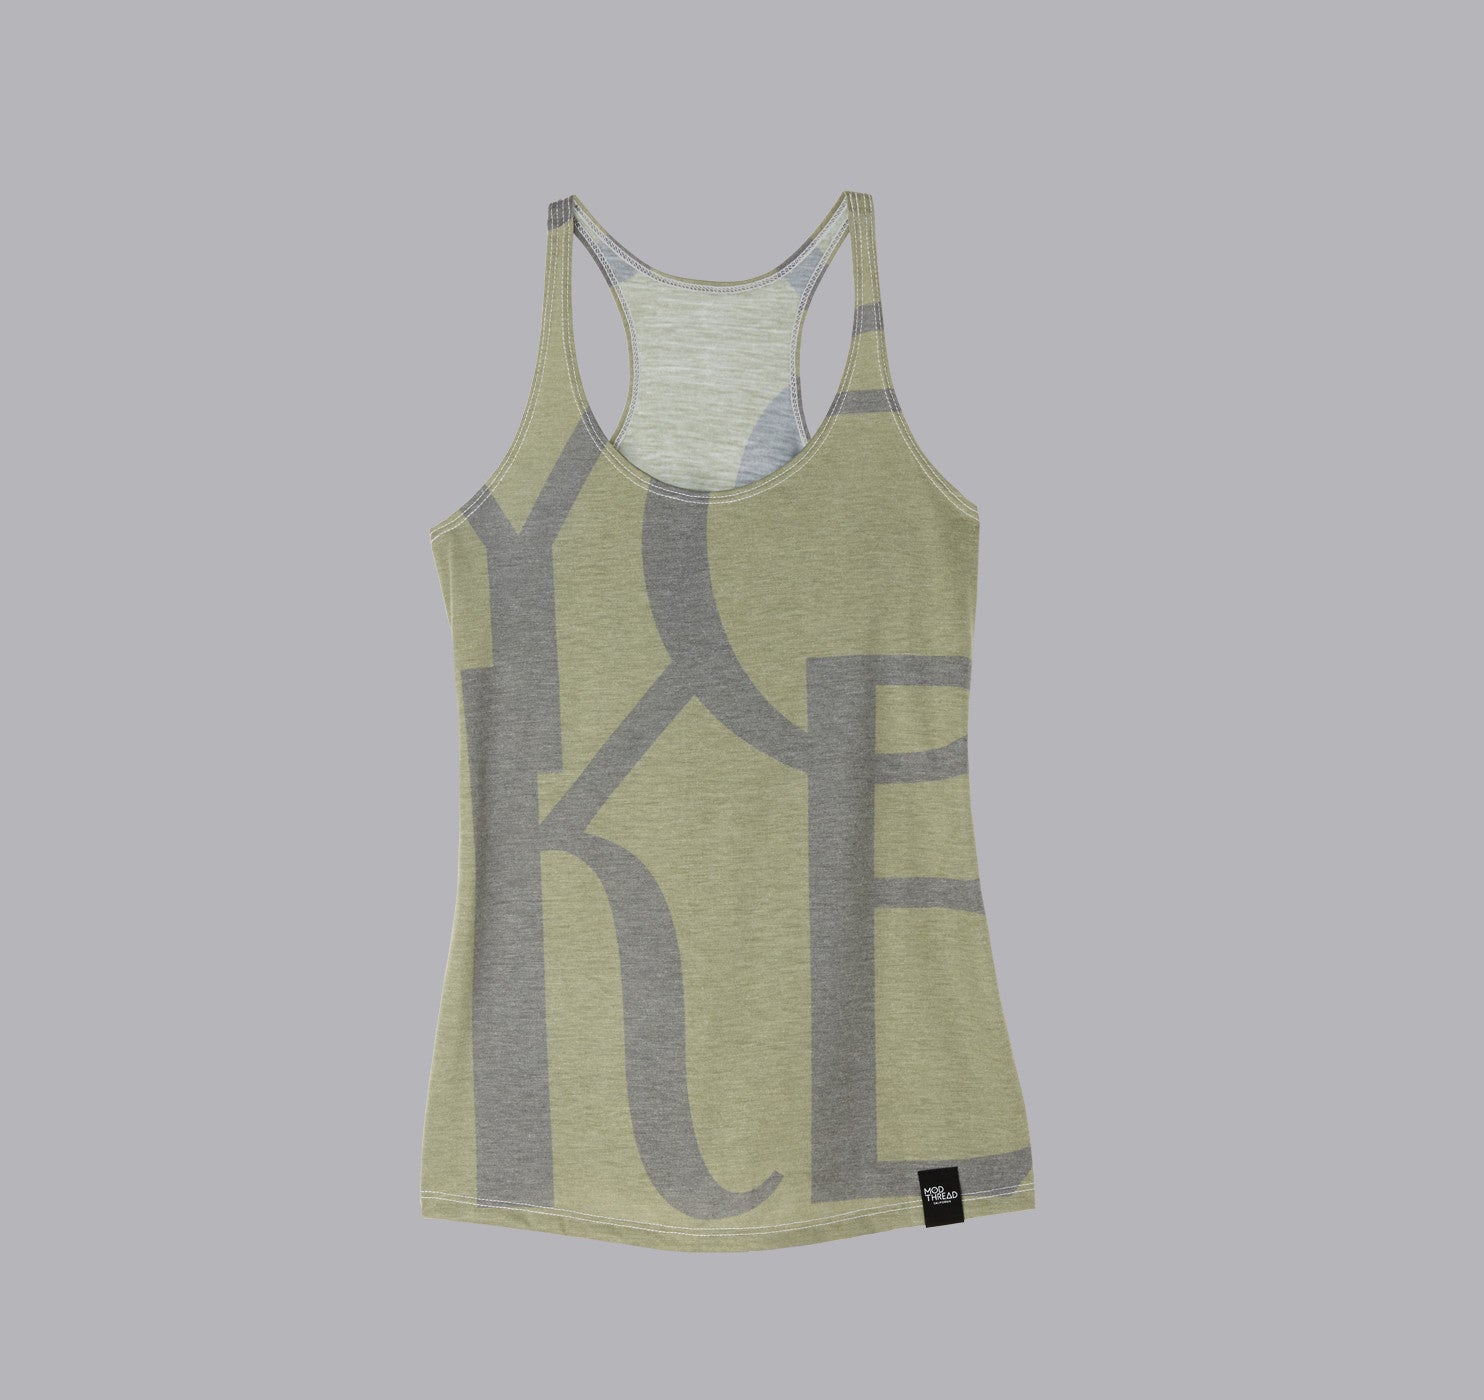 Womens Racerback Tank, The New Yorker in Olive - Mod Thread